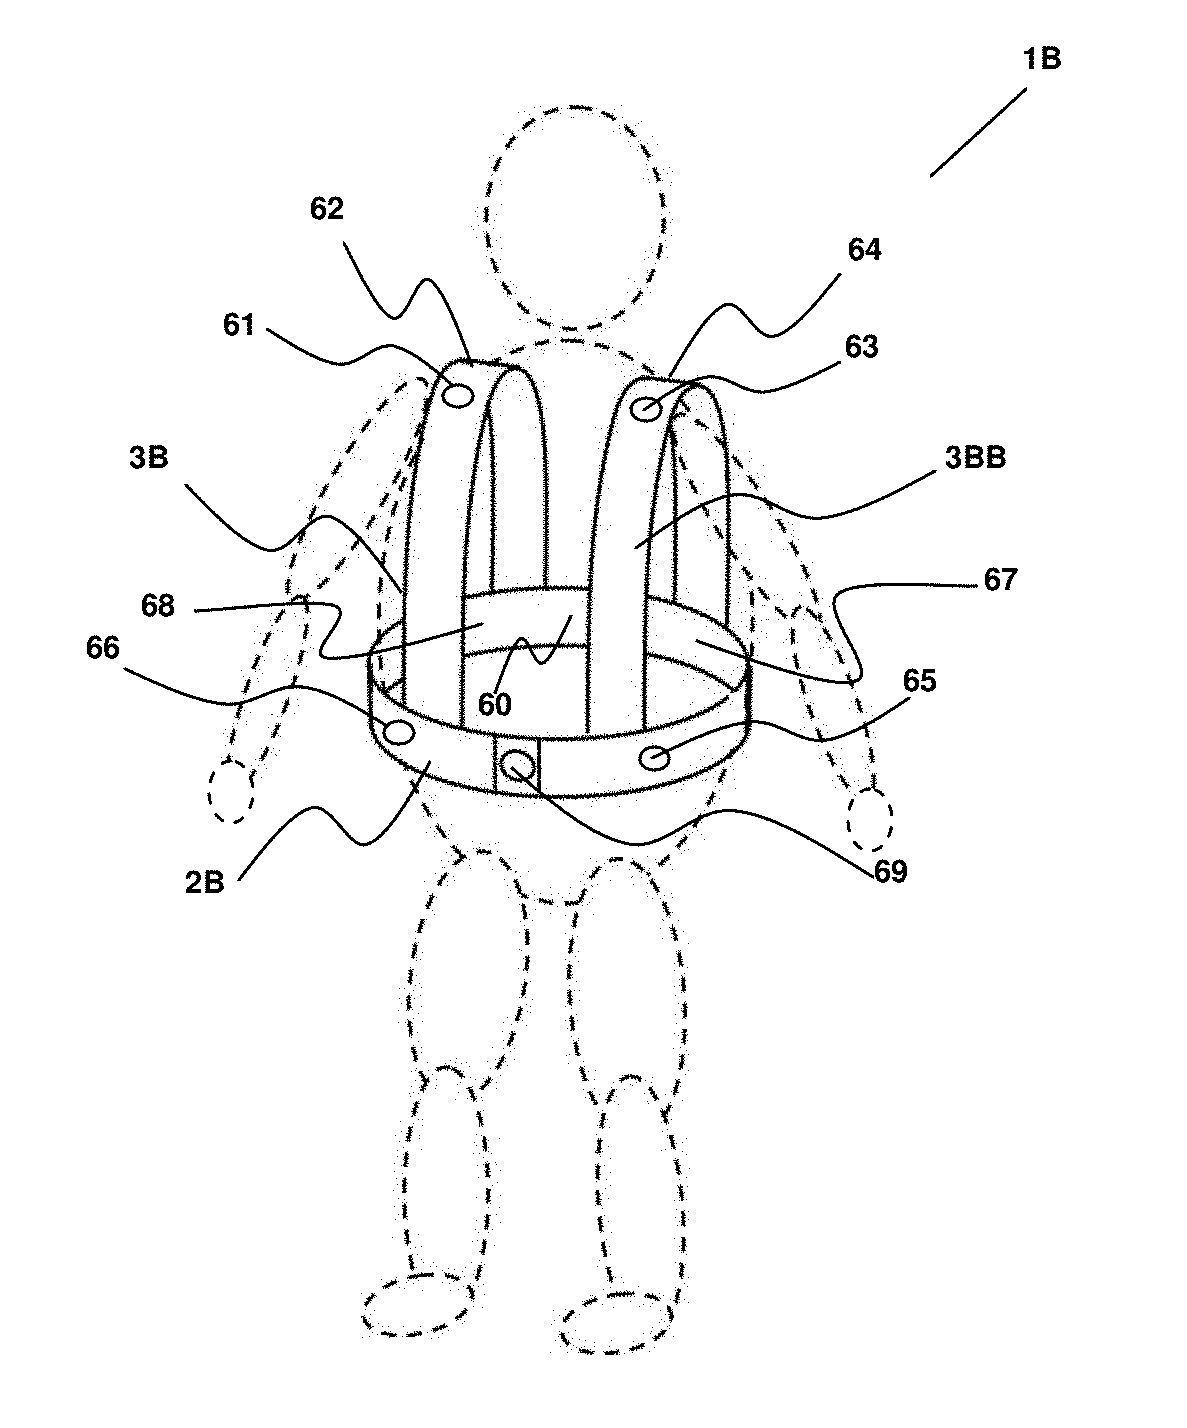 Personal wearable airbag device for preventing injury